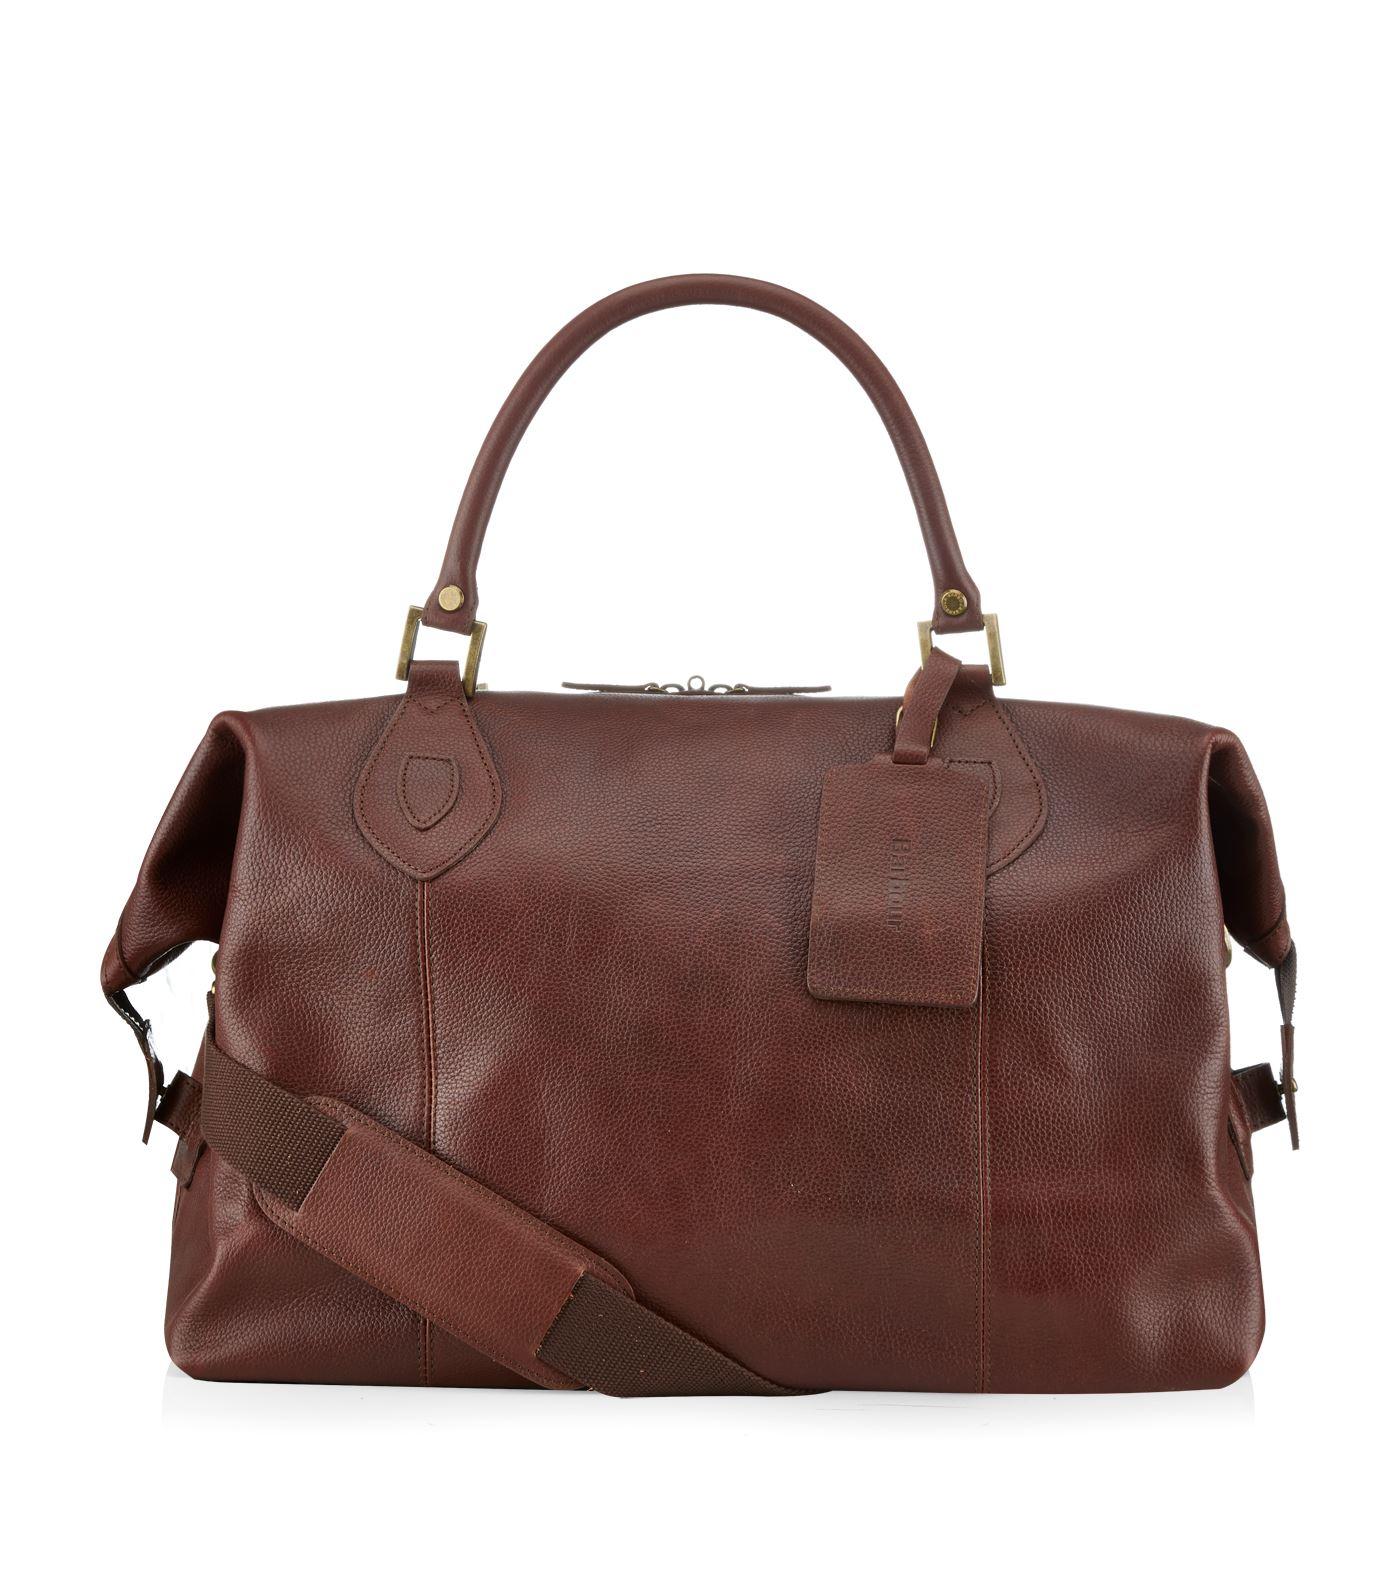 Barbour Leather Travel Explorer Bag in Brown - Lyst